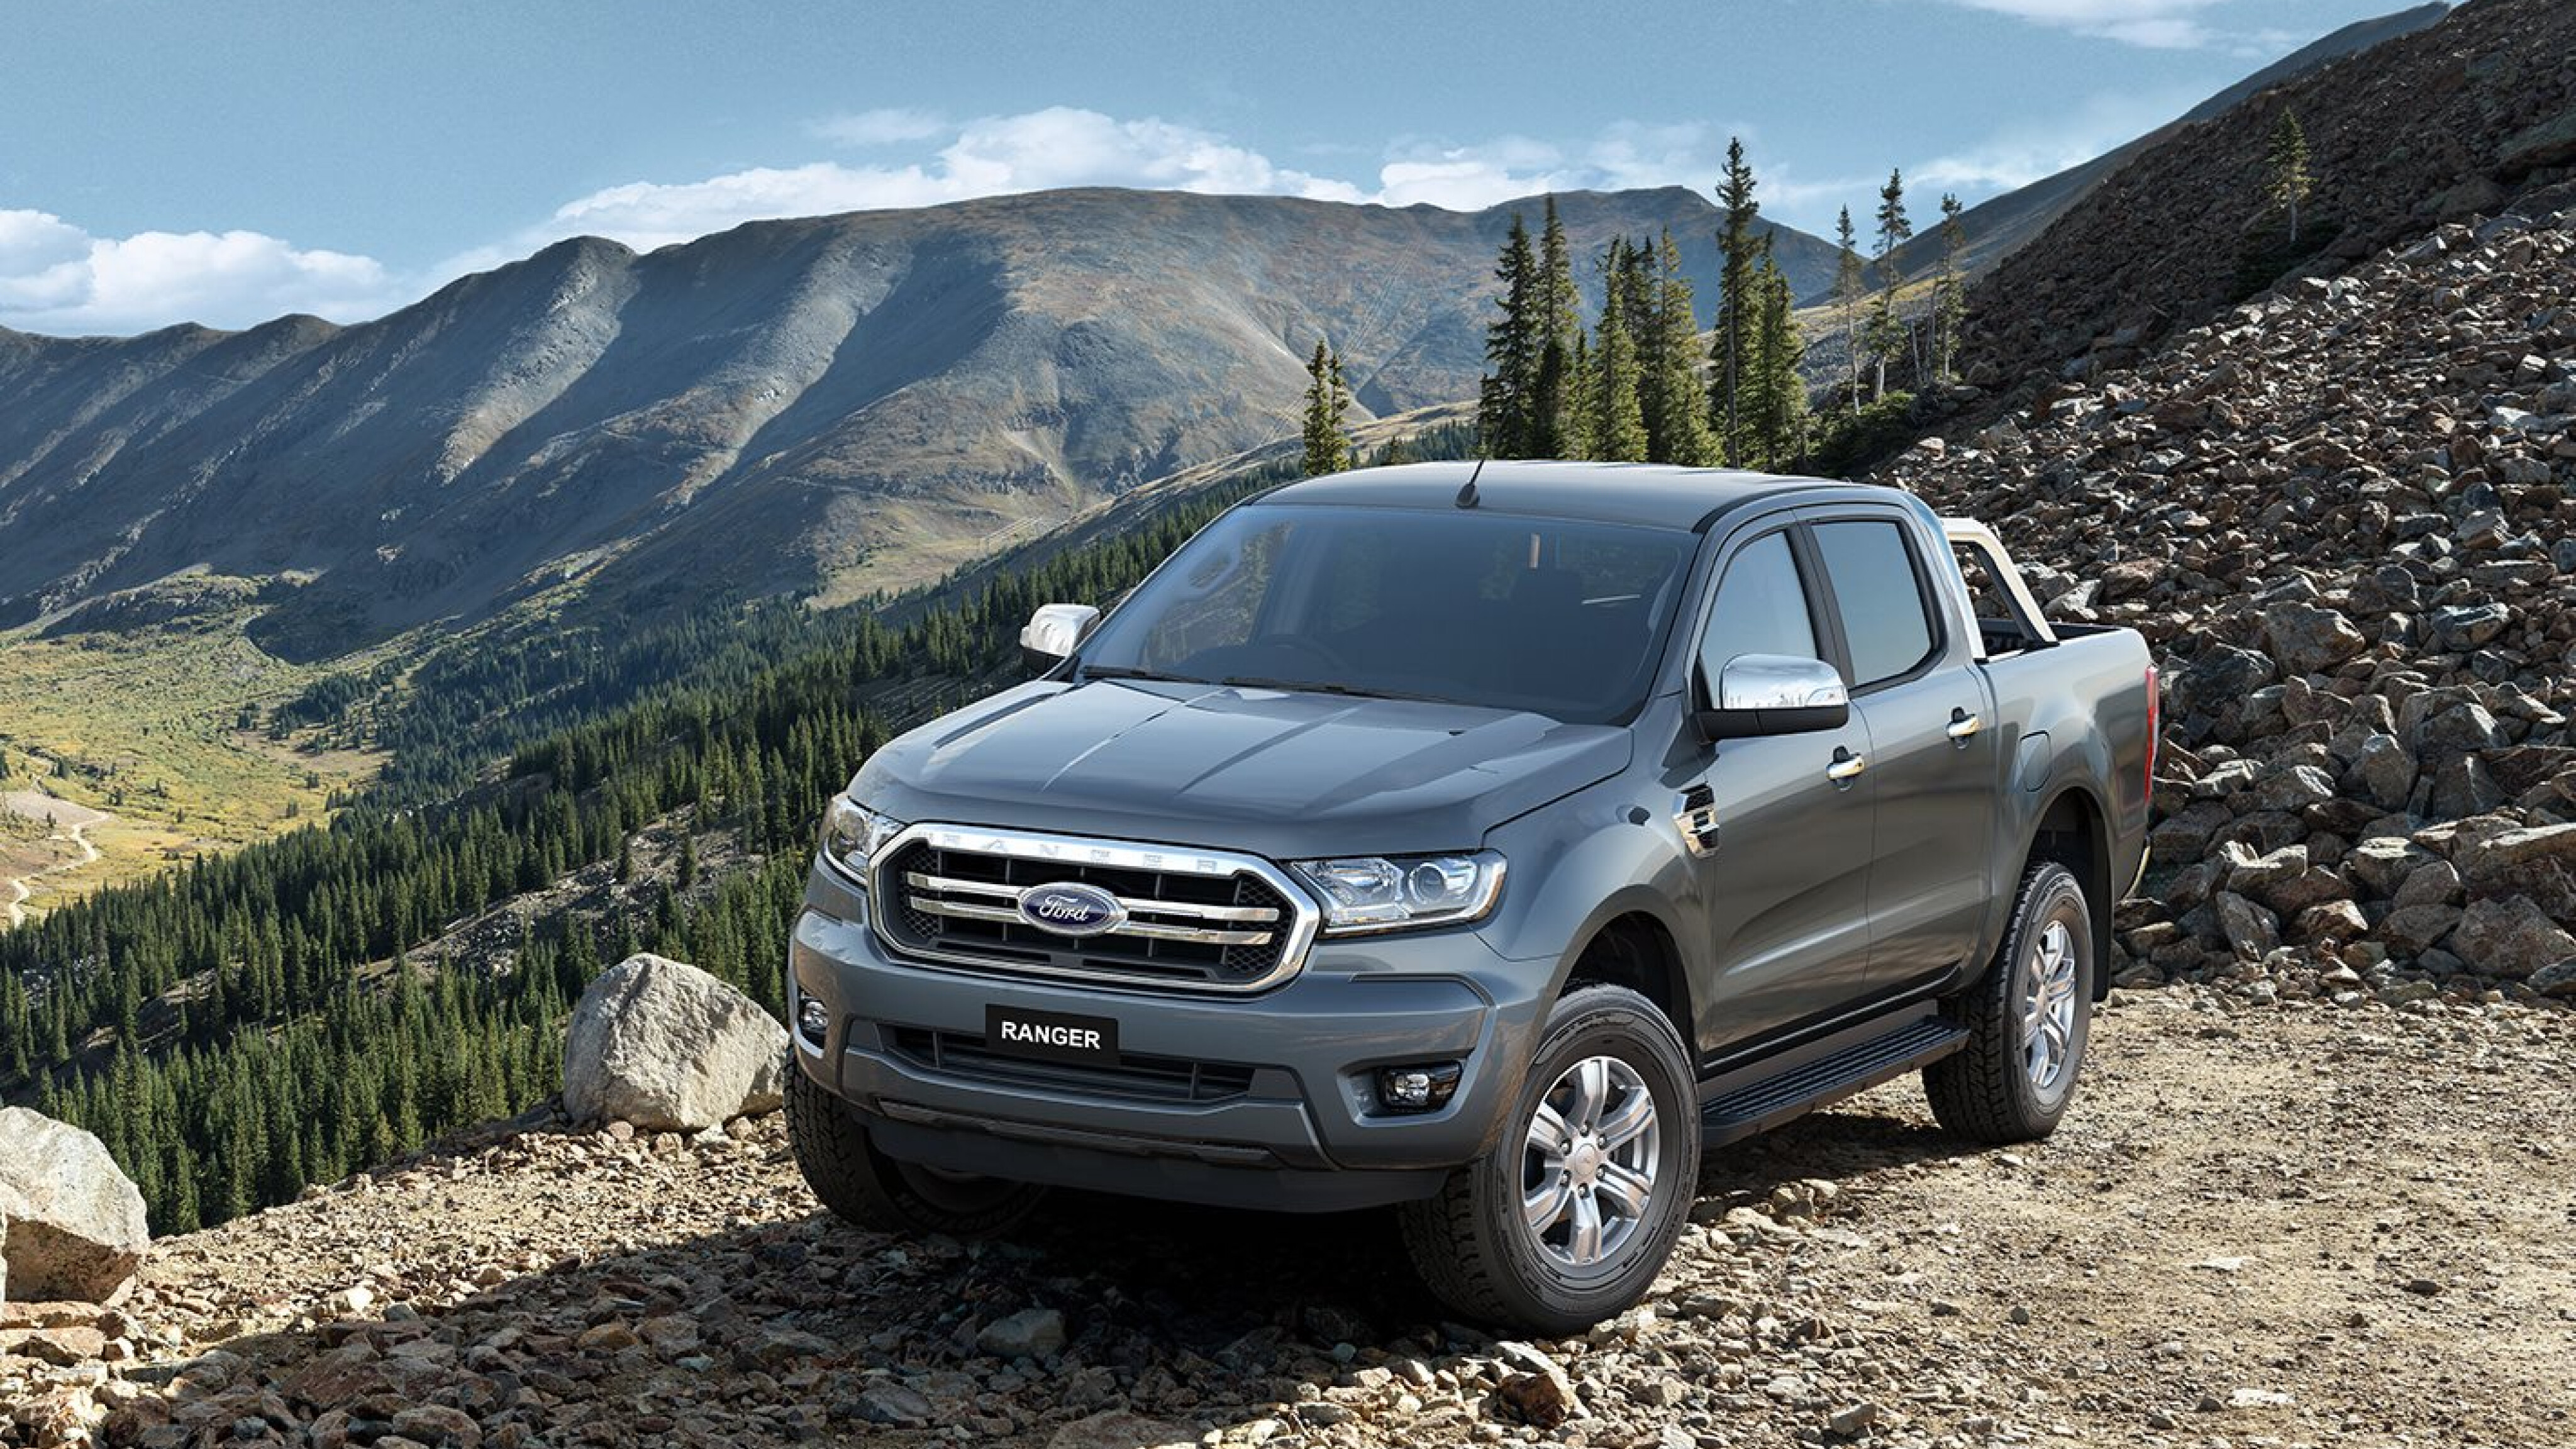 2019 Ford Ranger pricing announced